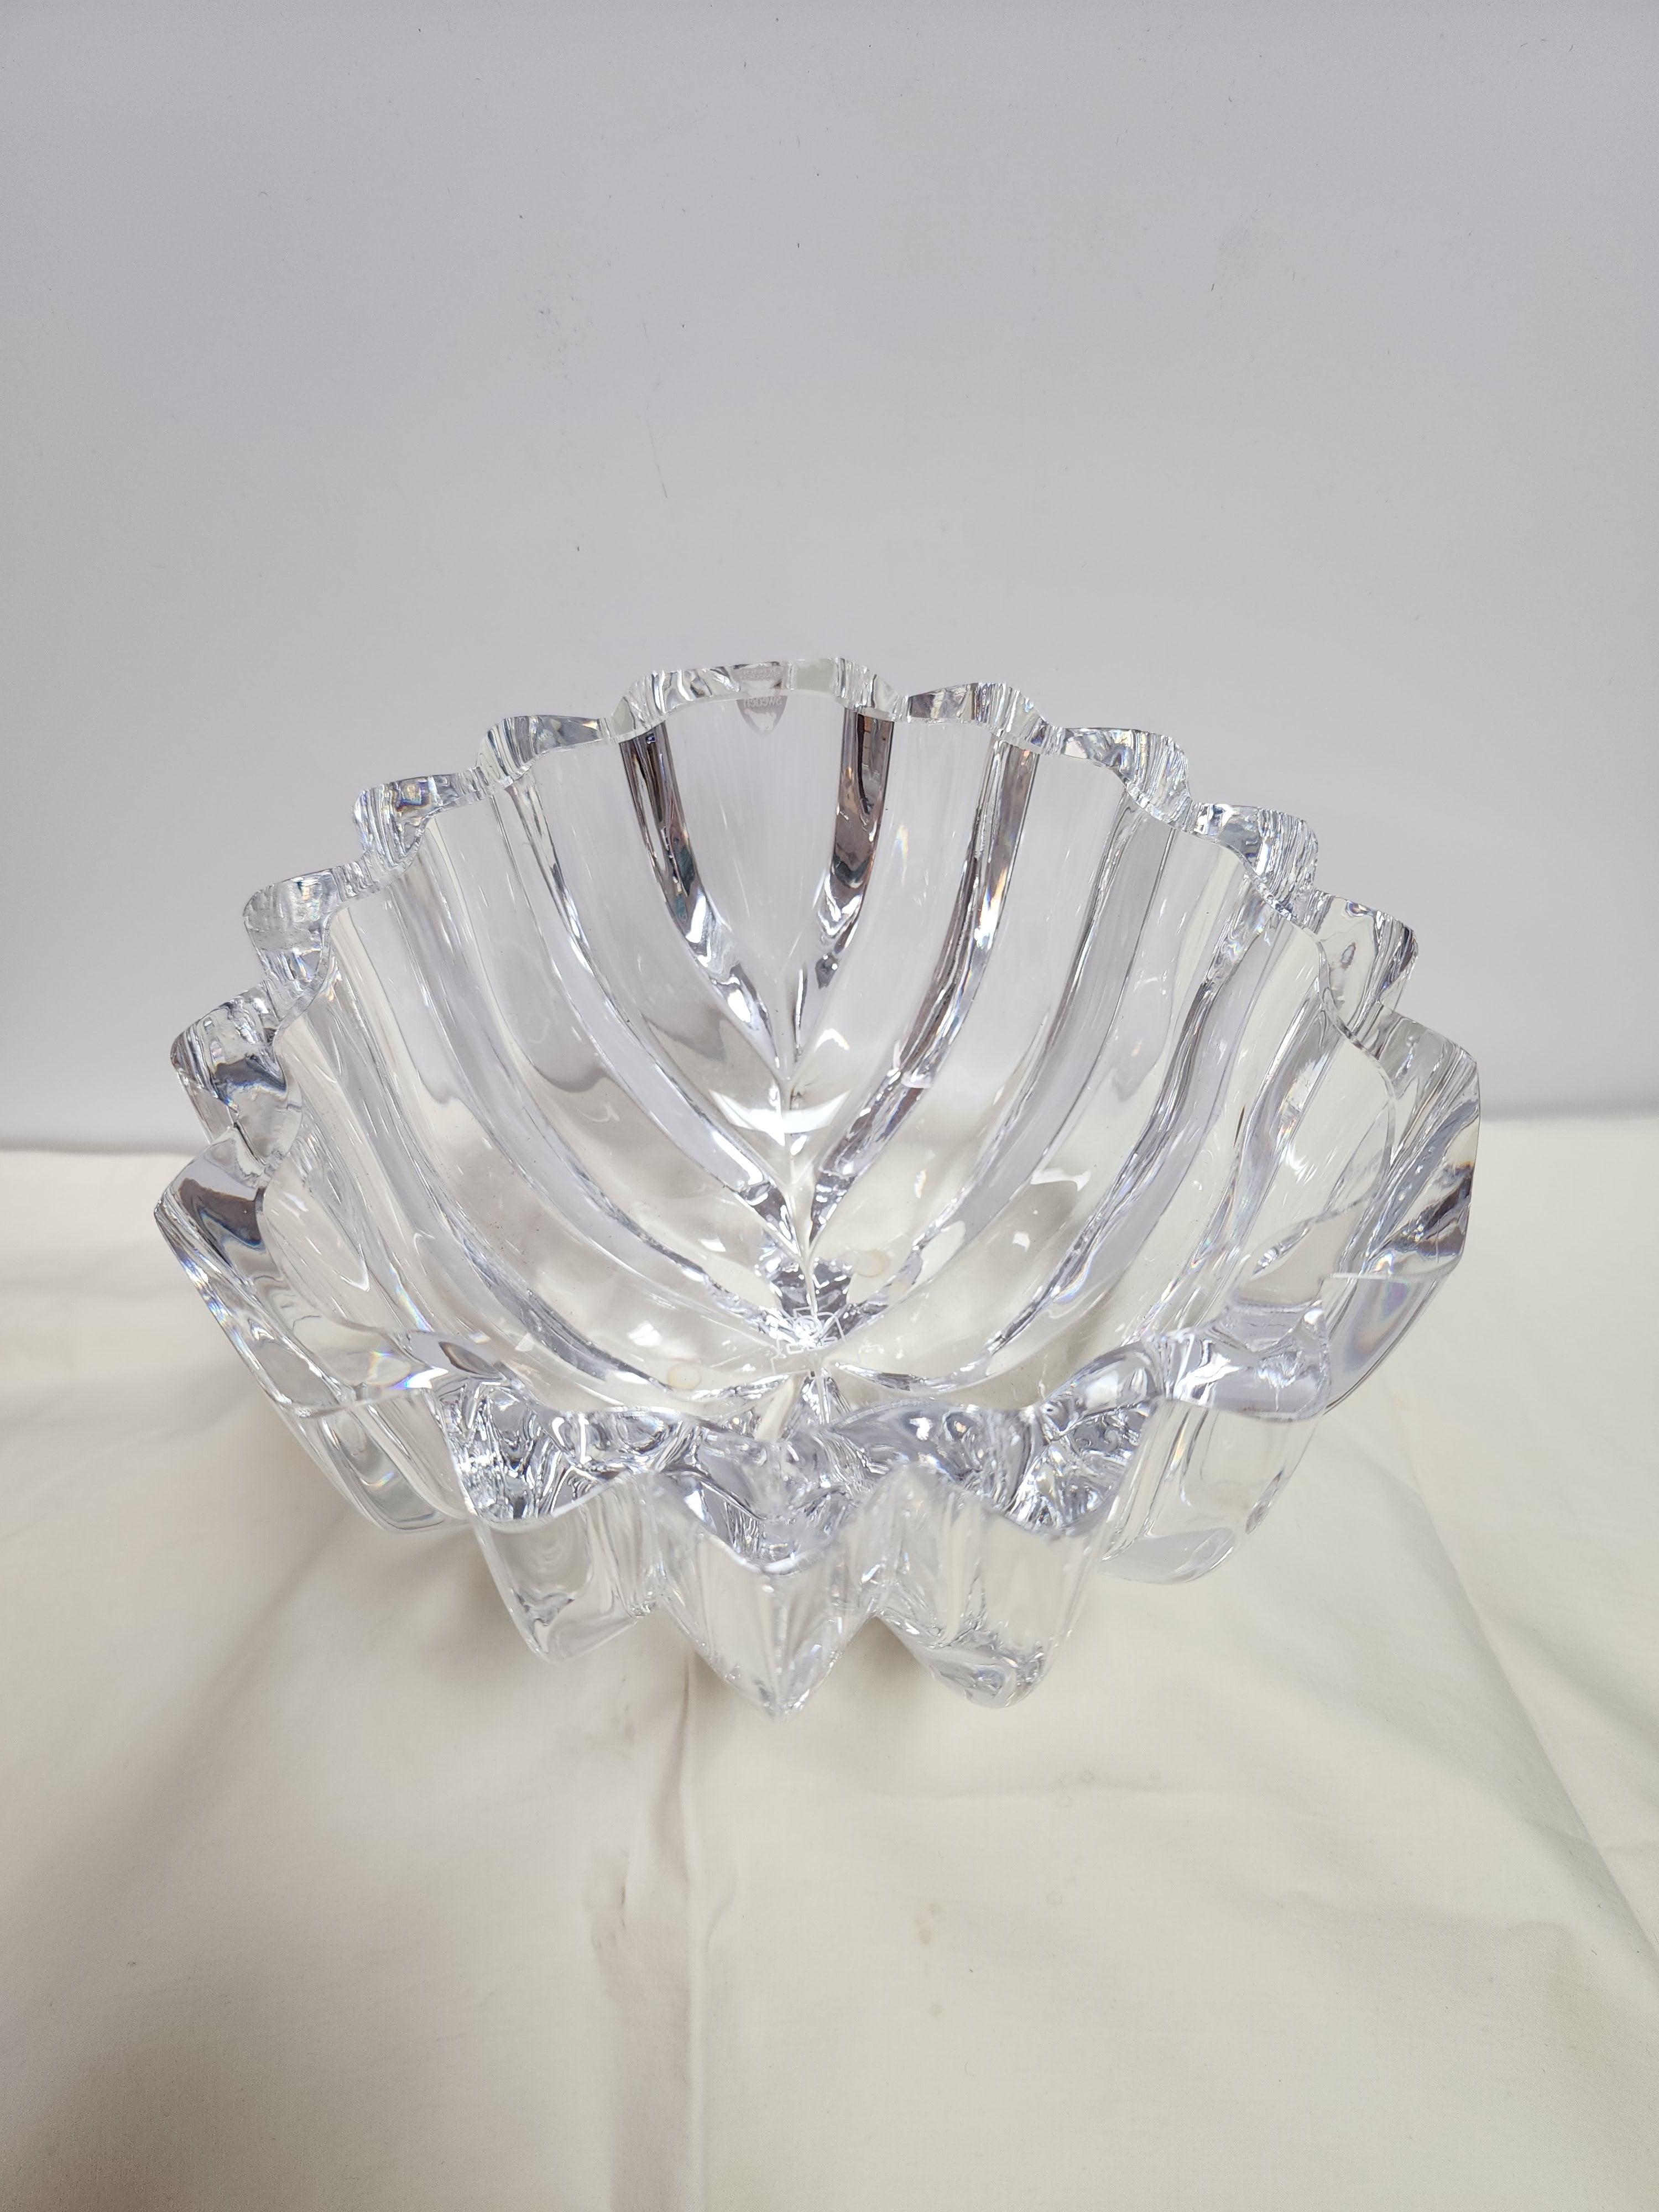 This vintage Swedish cut crystal bowl was designed by Lars Hellsten. It is very heavy and high quality. The original sticker is intact and the signature is clear. The stamped logo is also clearly visible. 